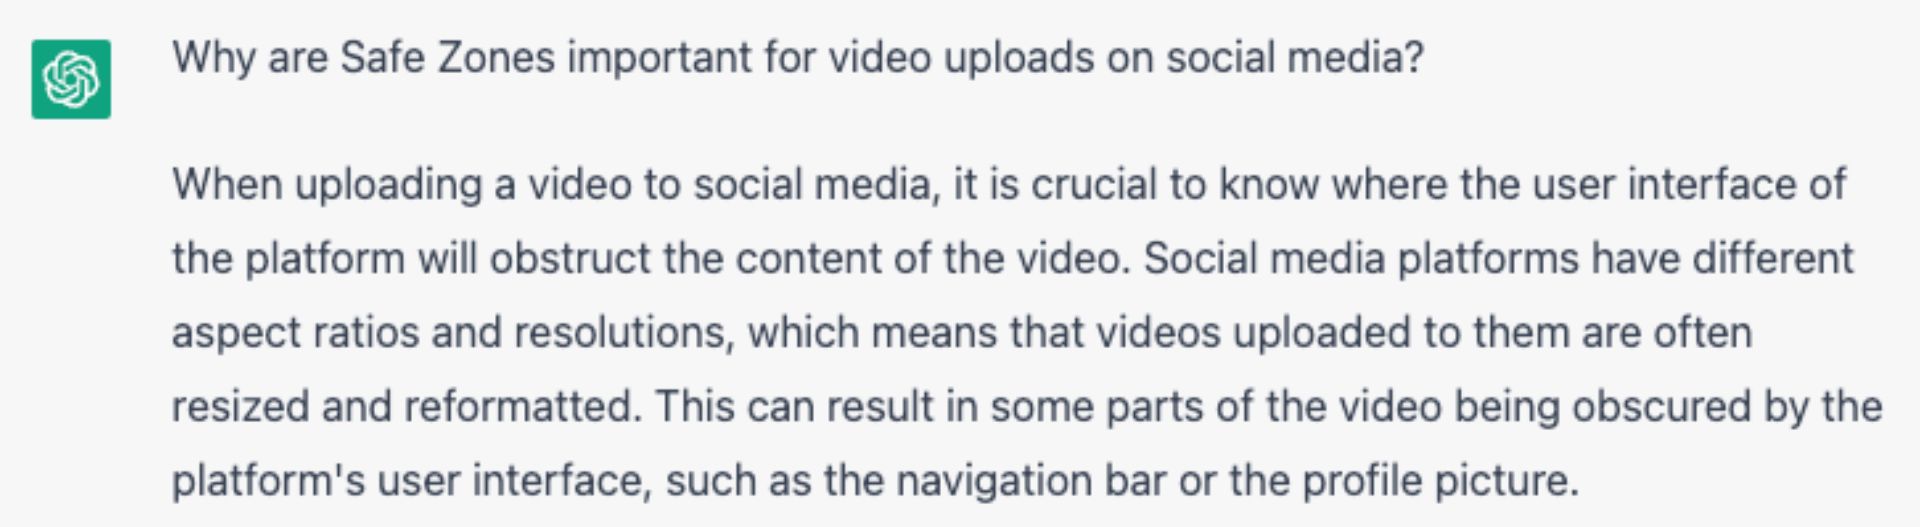 Screenshot of a ChatGPT response that reads: "Why are Safe Zones important for video uploads on social media?  When uploading a video to social media, it is crucial to know where the user interface of the platform will obstruct the content of the video. Social media platforms have different aspect ratios and resolutions, which means that videos uploaded to them are often resized and reformatted. This can result in some parts of the video being obscured by the platform's user interface, such as the navigation bar or the profile picture."